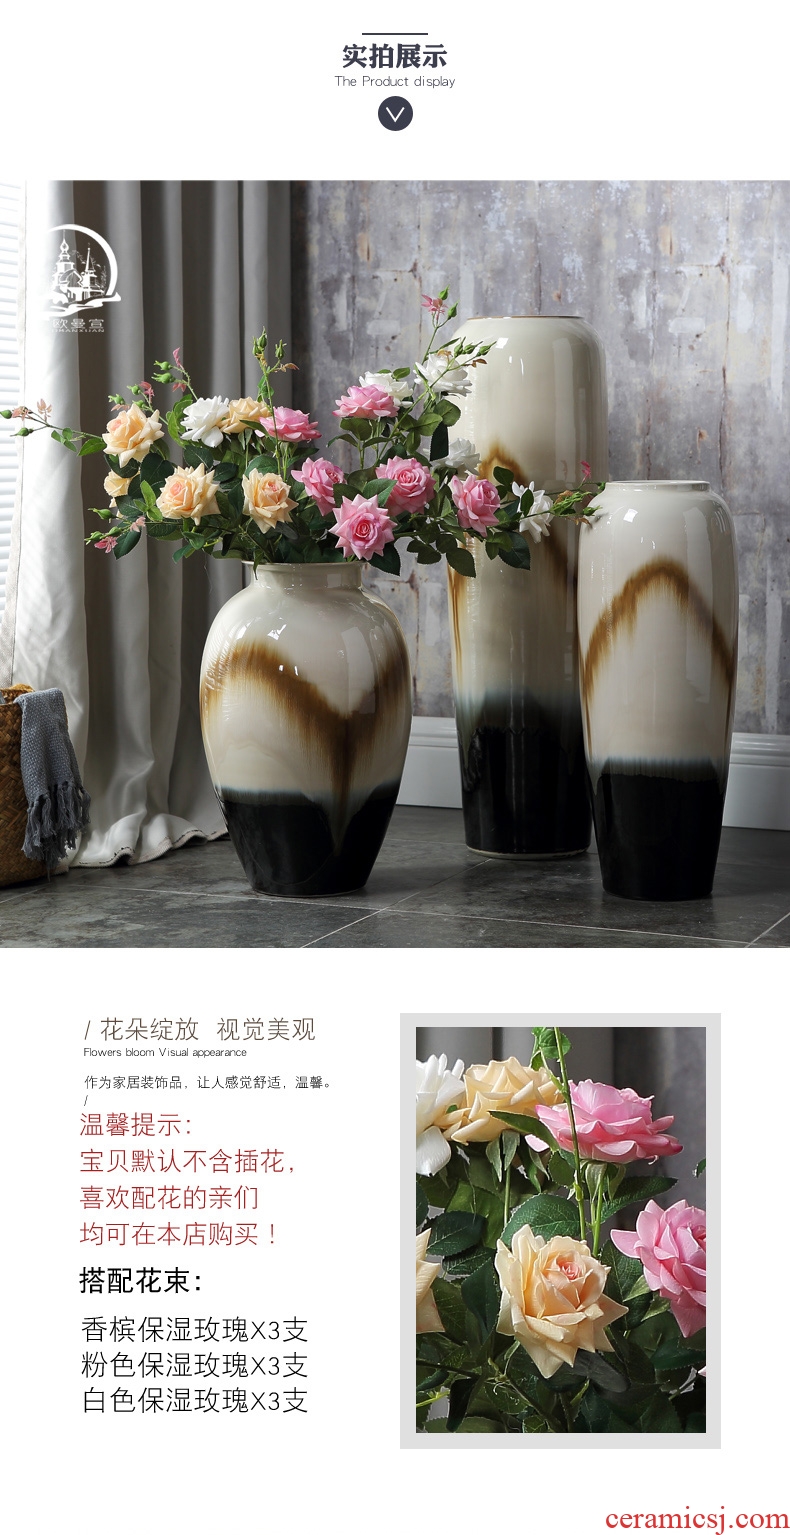 YOU brother ceramic kiln vase Chinese penjing large flower arranging hydroponic flower implement - 569562031184 household porcelain decorations arts and crafts